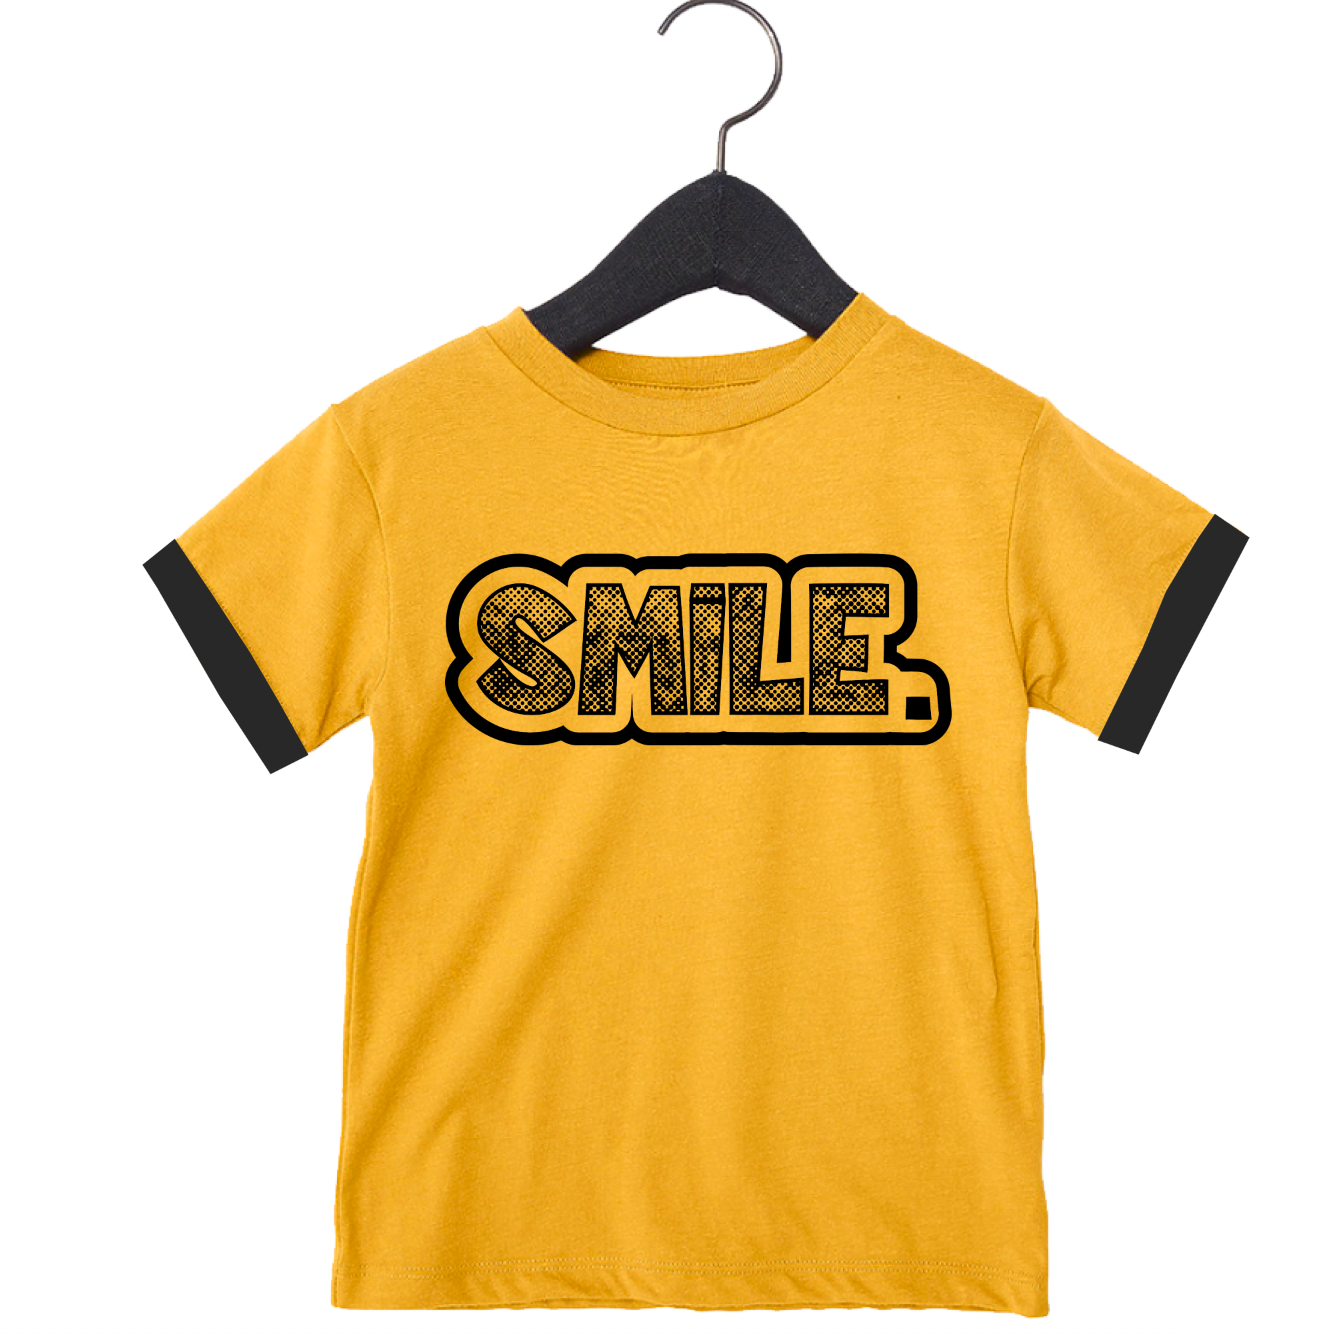 SMILE Yellow Tee - Unisex for Boys and Girls